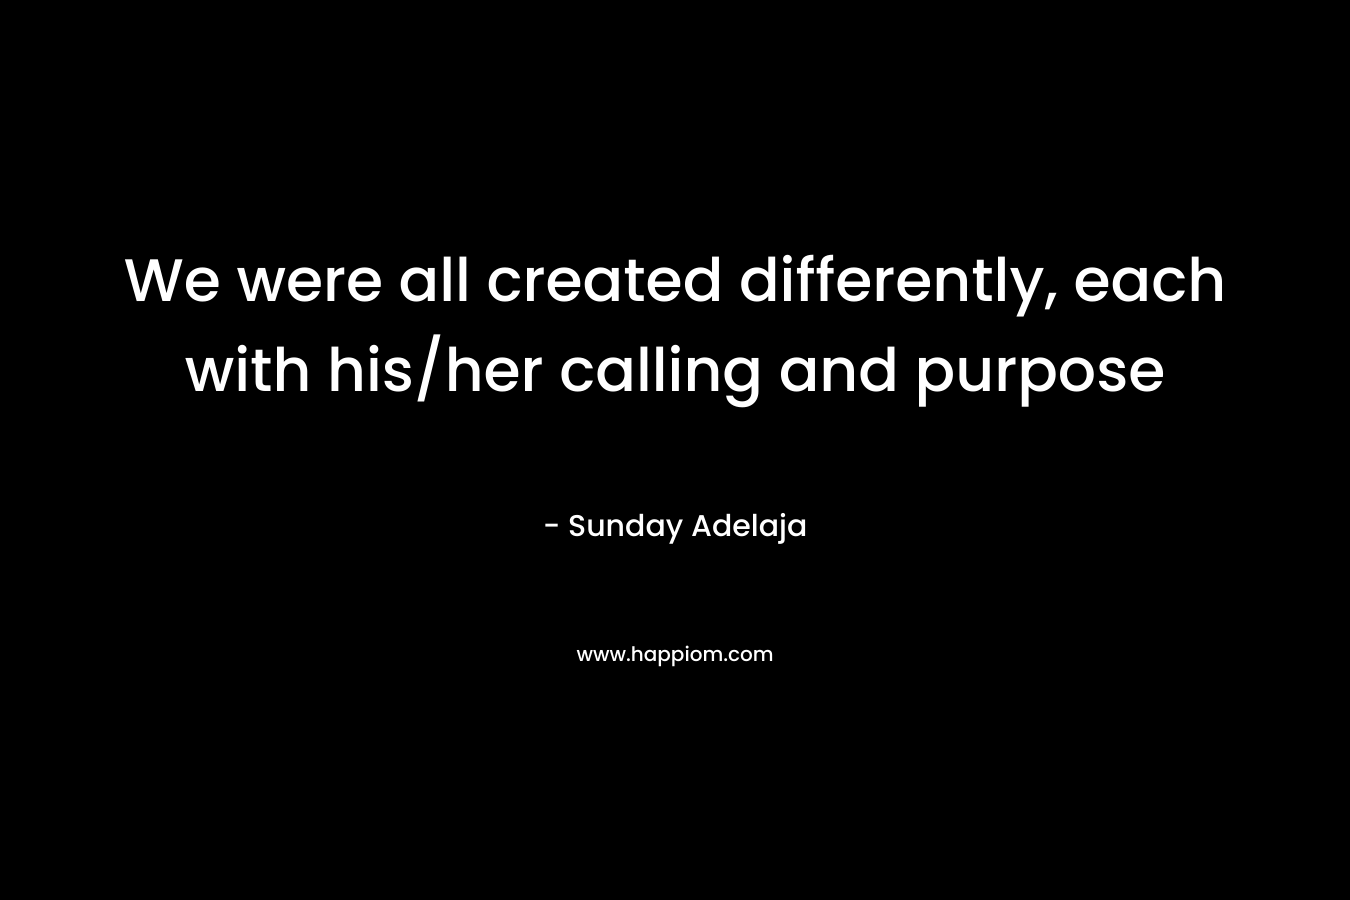 We were all created differently, each with his/her calling and purpose